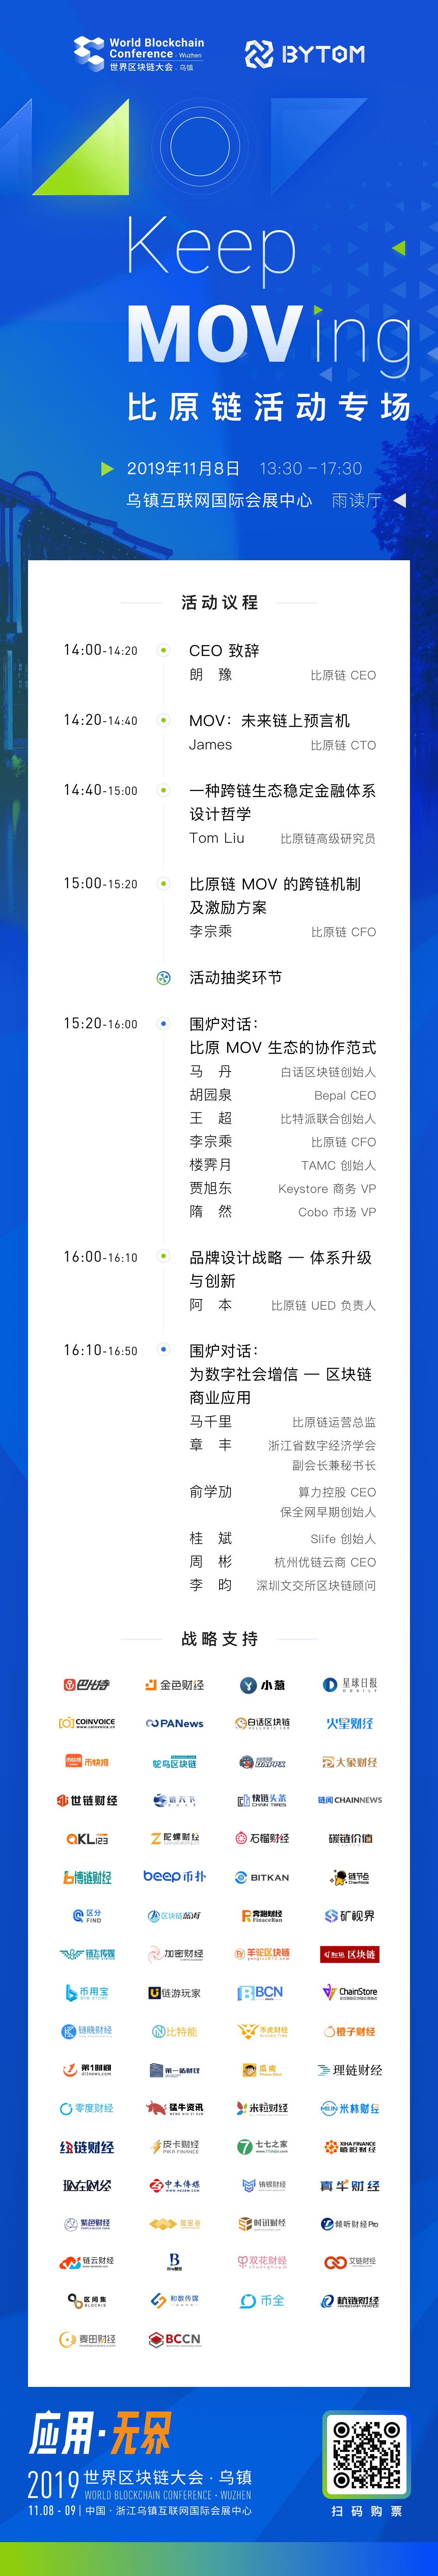 Wuzhen gathers more than the original special event, and talks about the blockchain ecology and application.